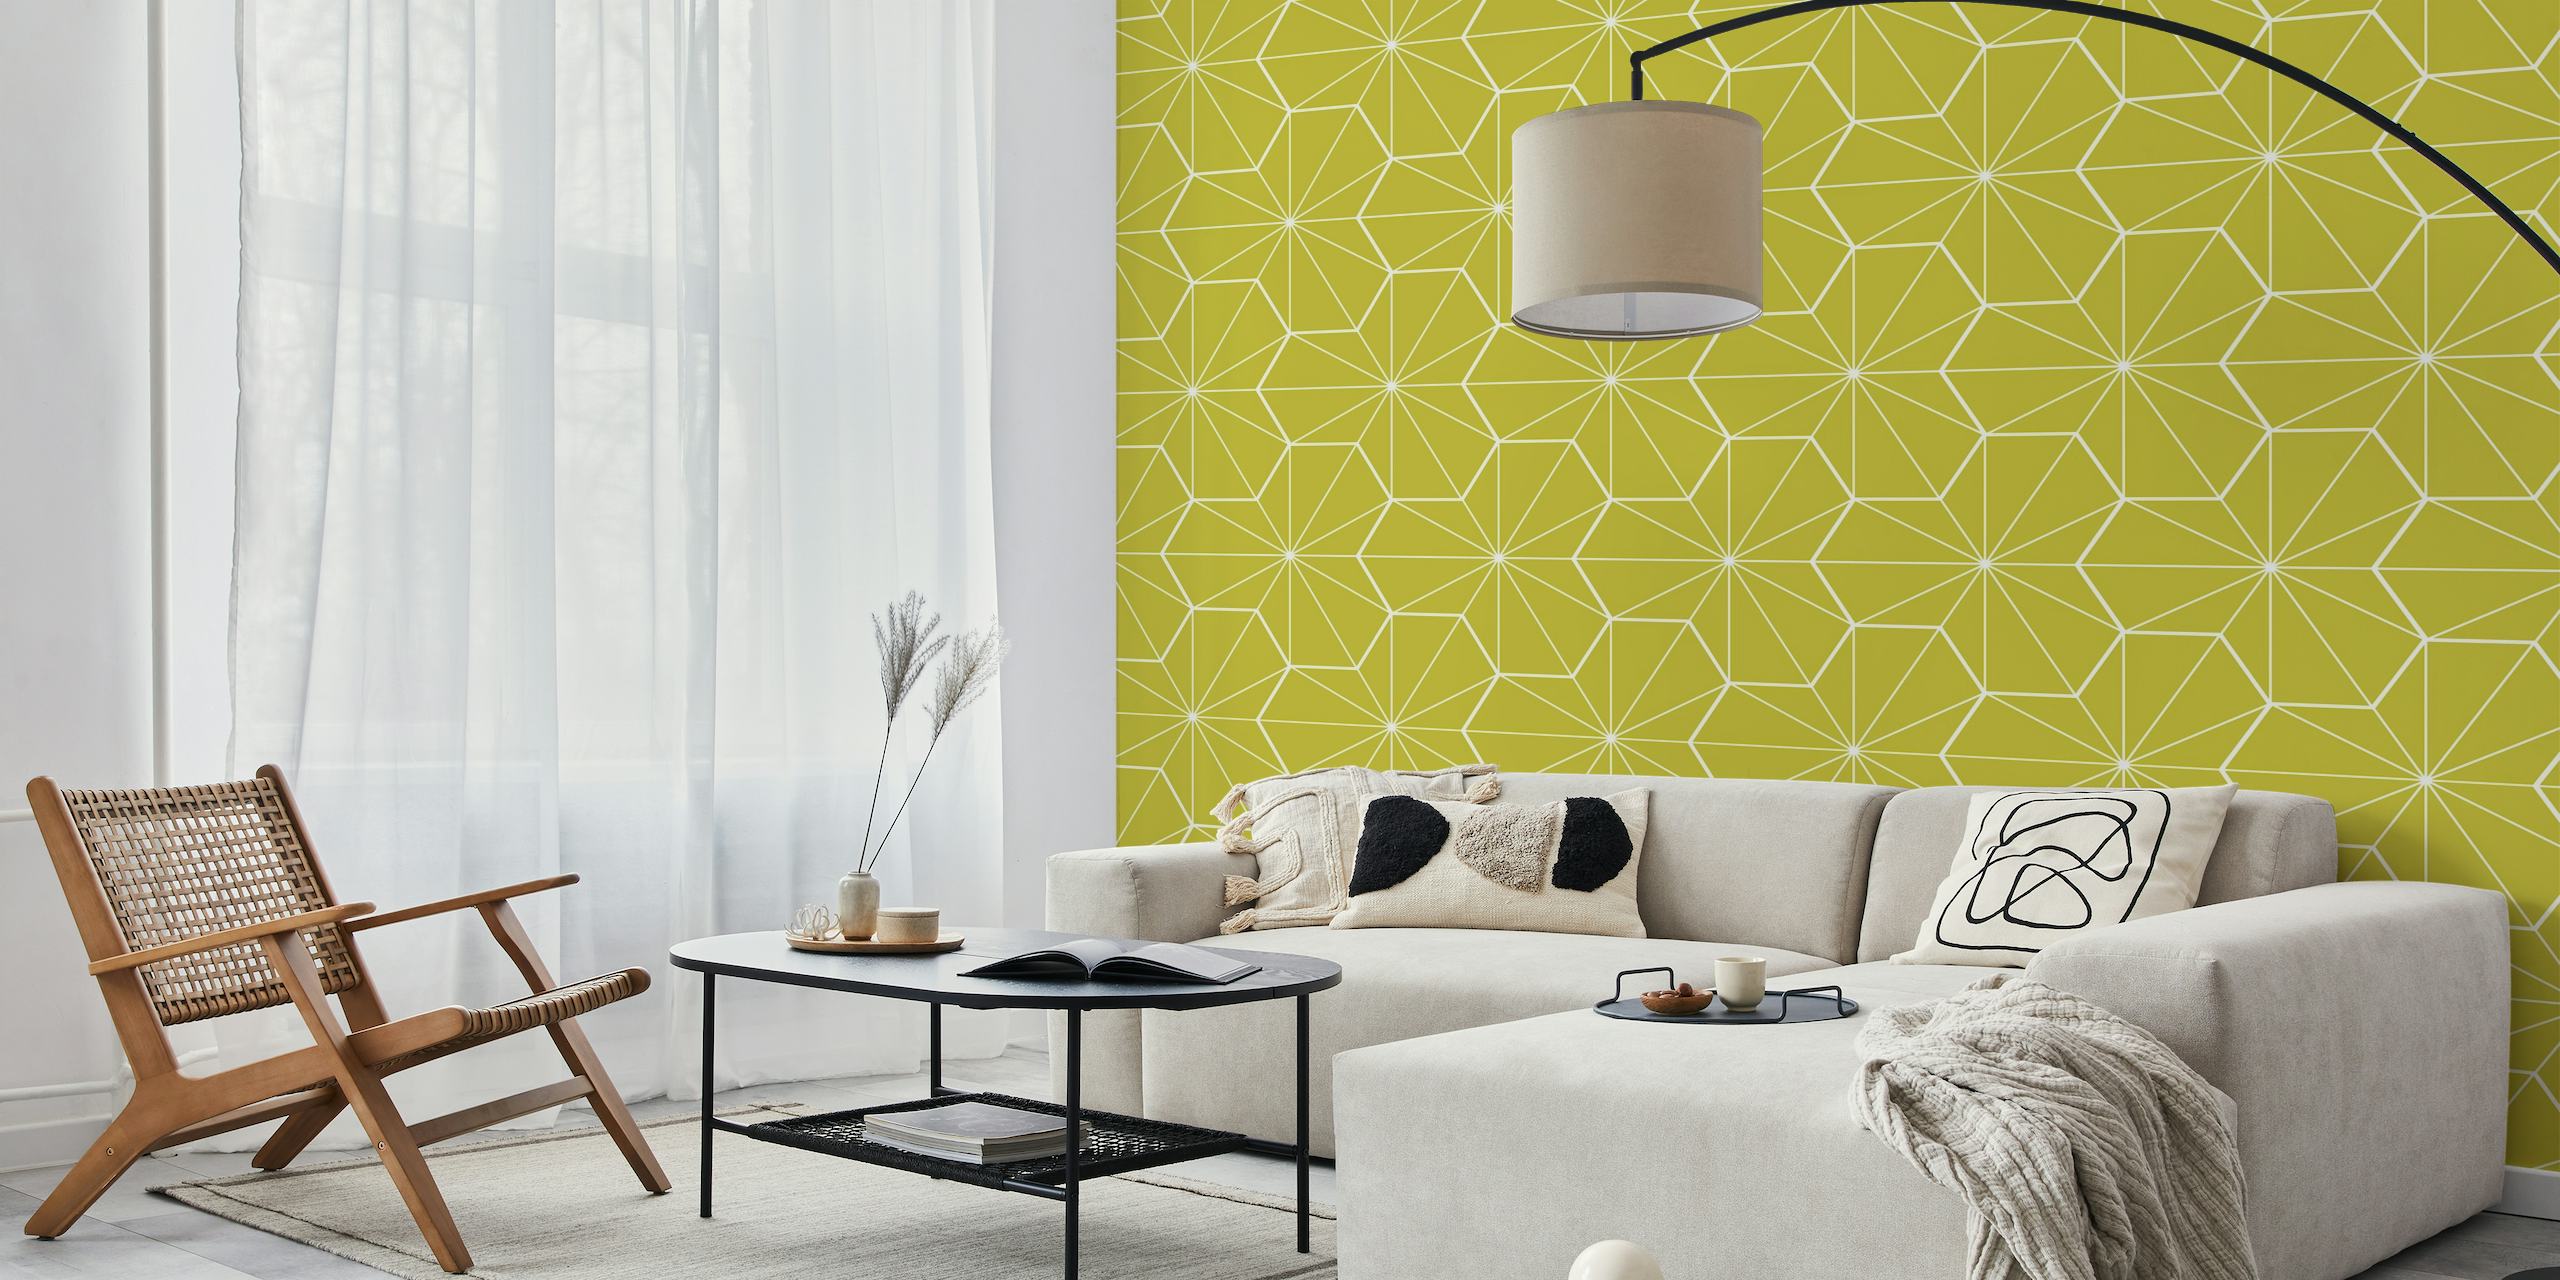 Vibrant mid-century style geometric pattern wall mural in yellow-green shades.